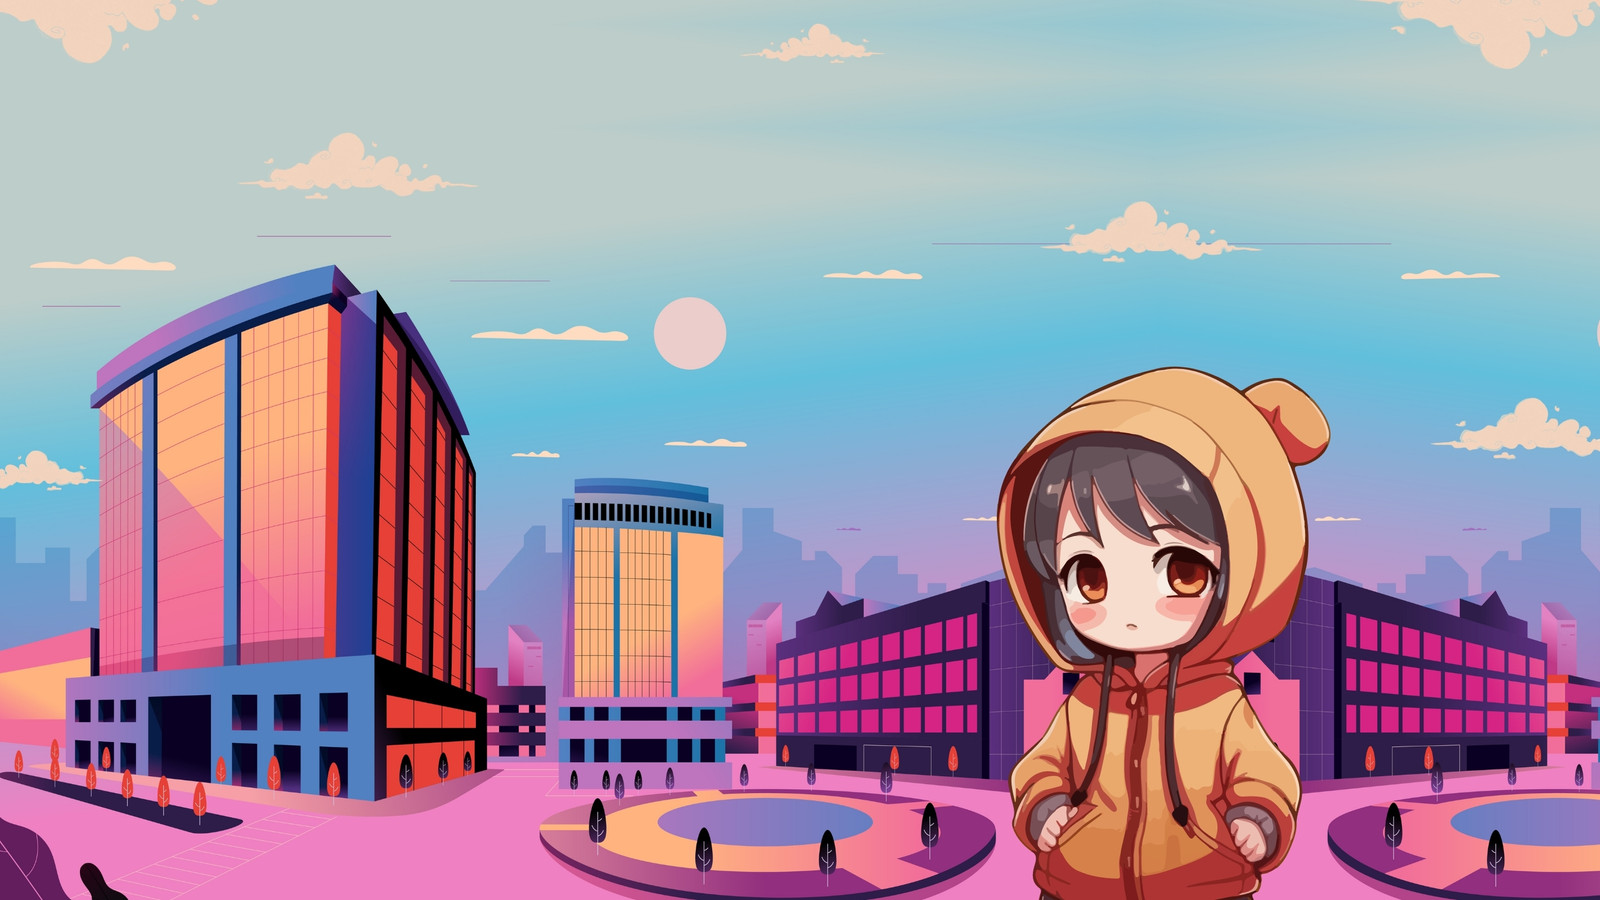 Download Take a break and relax with this chill anime wallpaper Wallpaper   Wallpaperscom